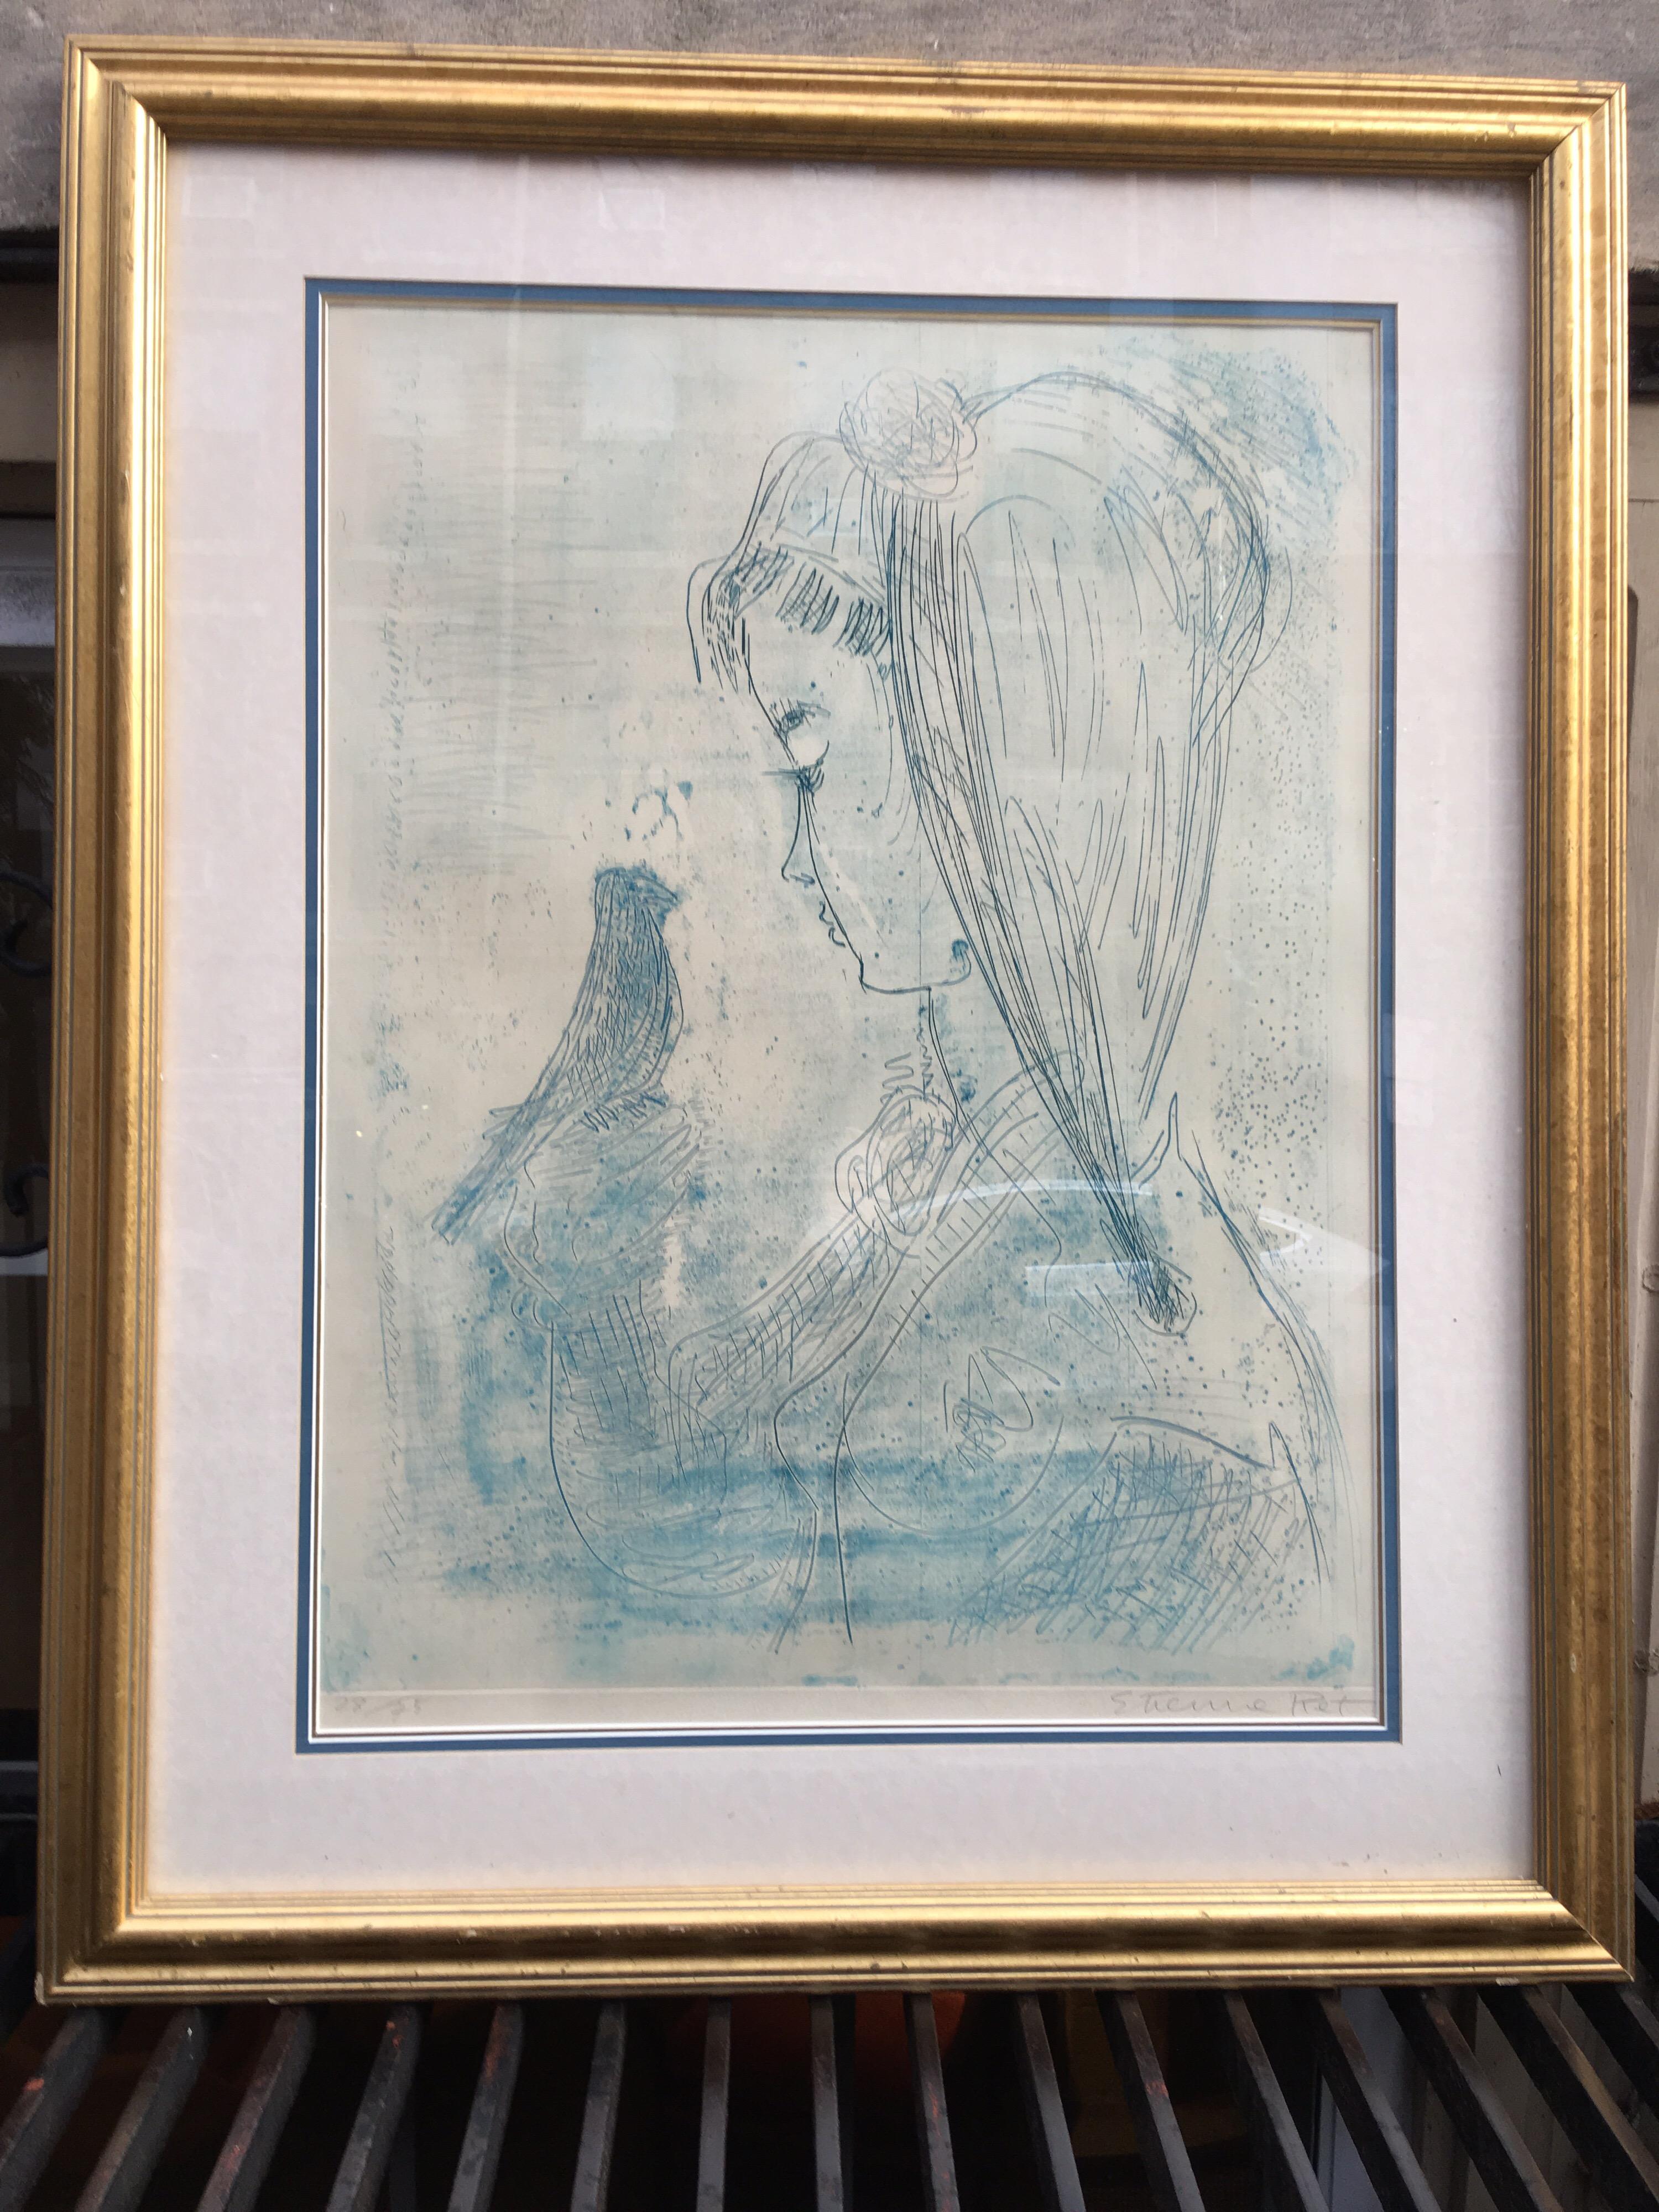 Etienne Ret signed and numbered lithograph of a girl with bird. Shades of blue, matted with a cream board and gold frame.